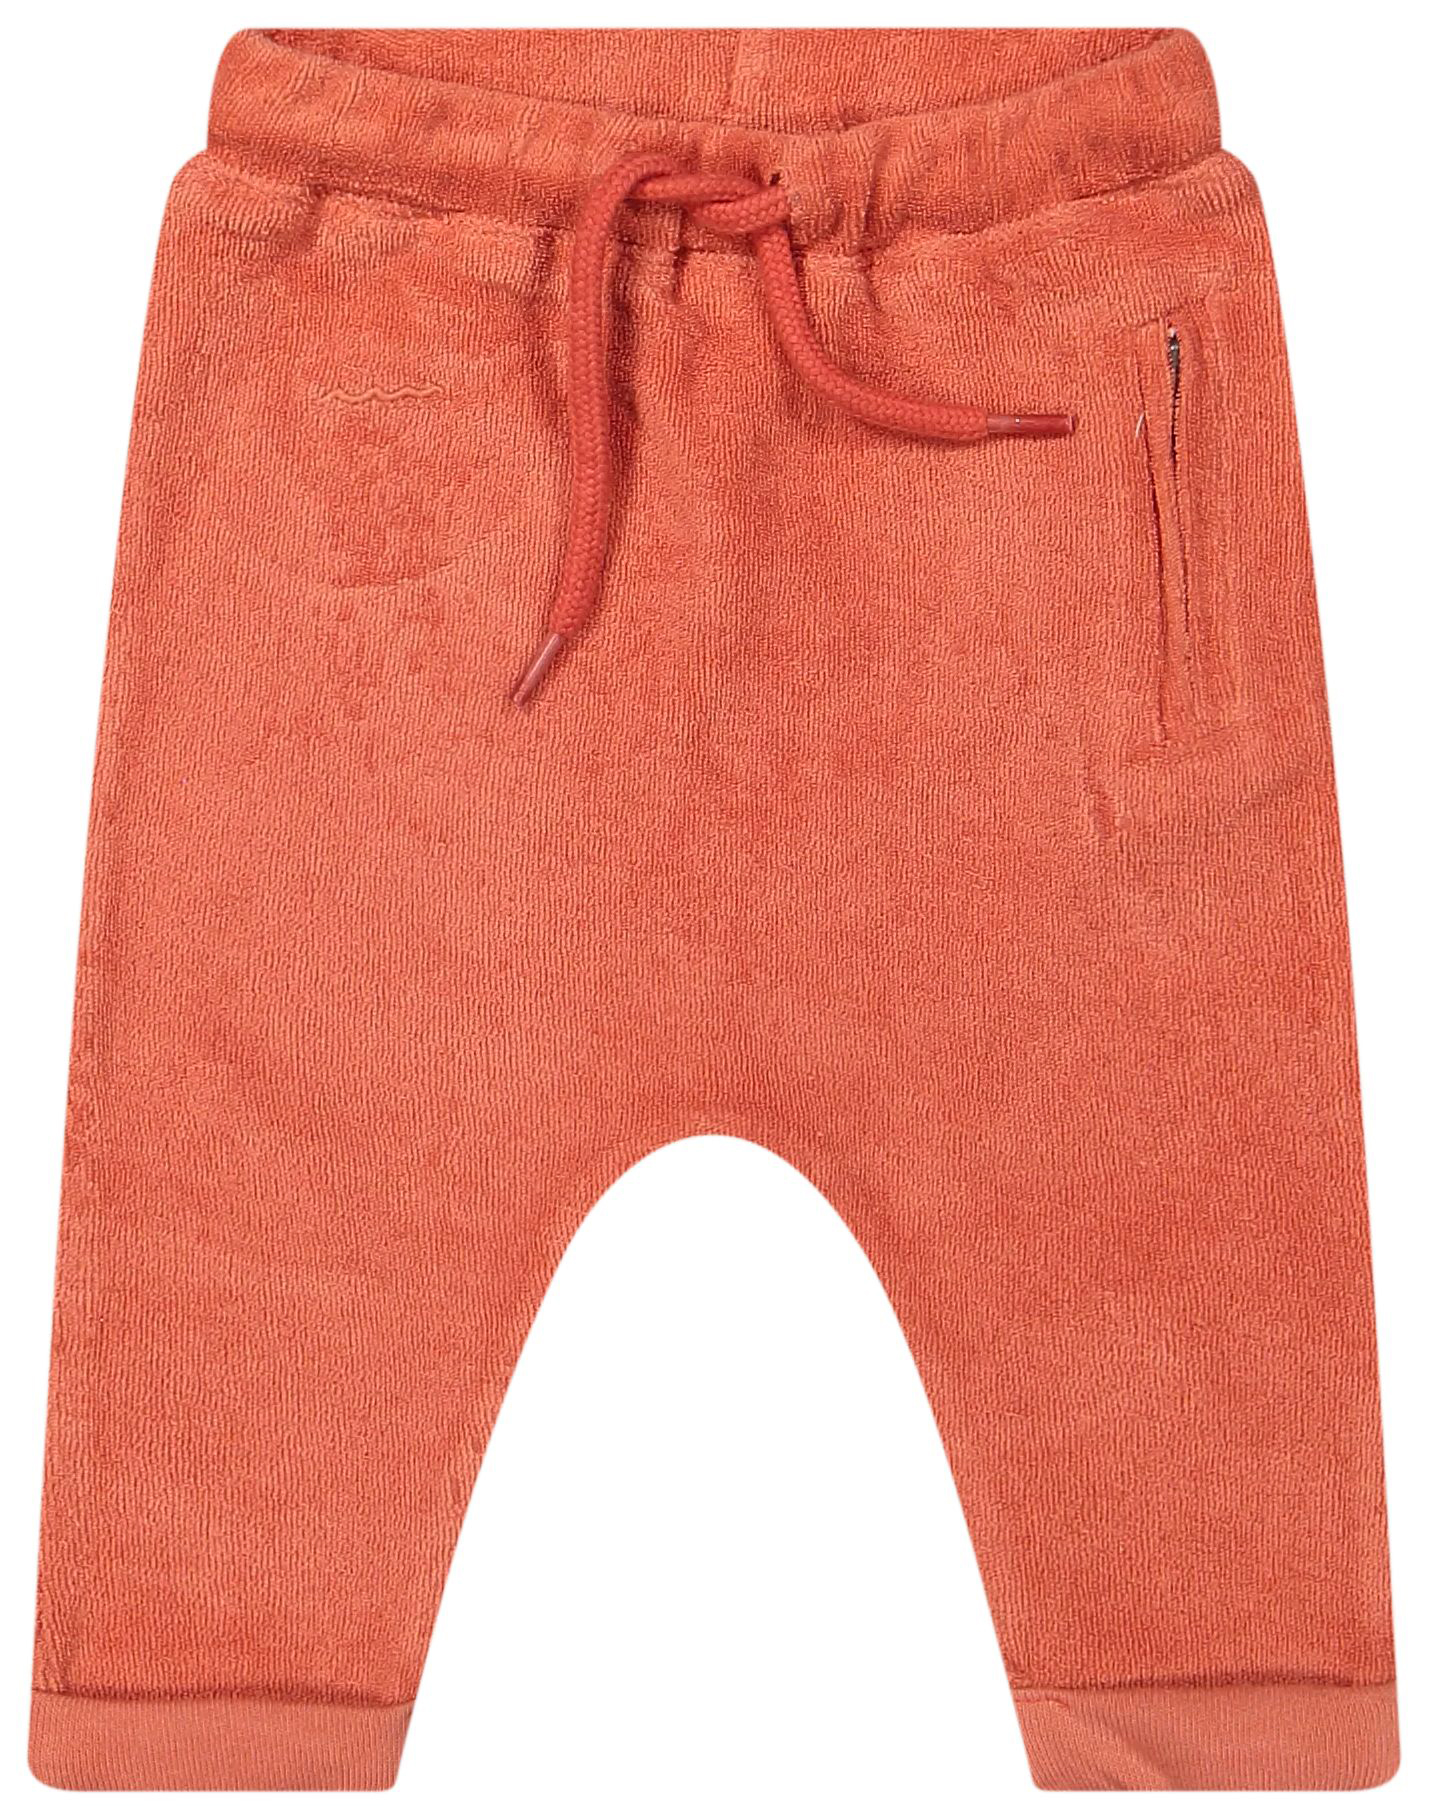 Riffle Baby Hose terry apricot